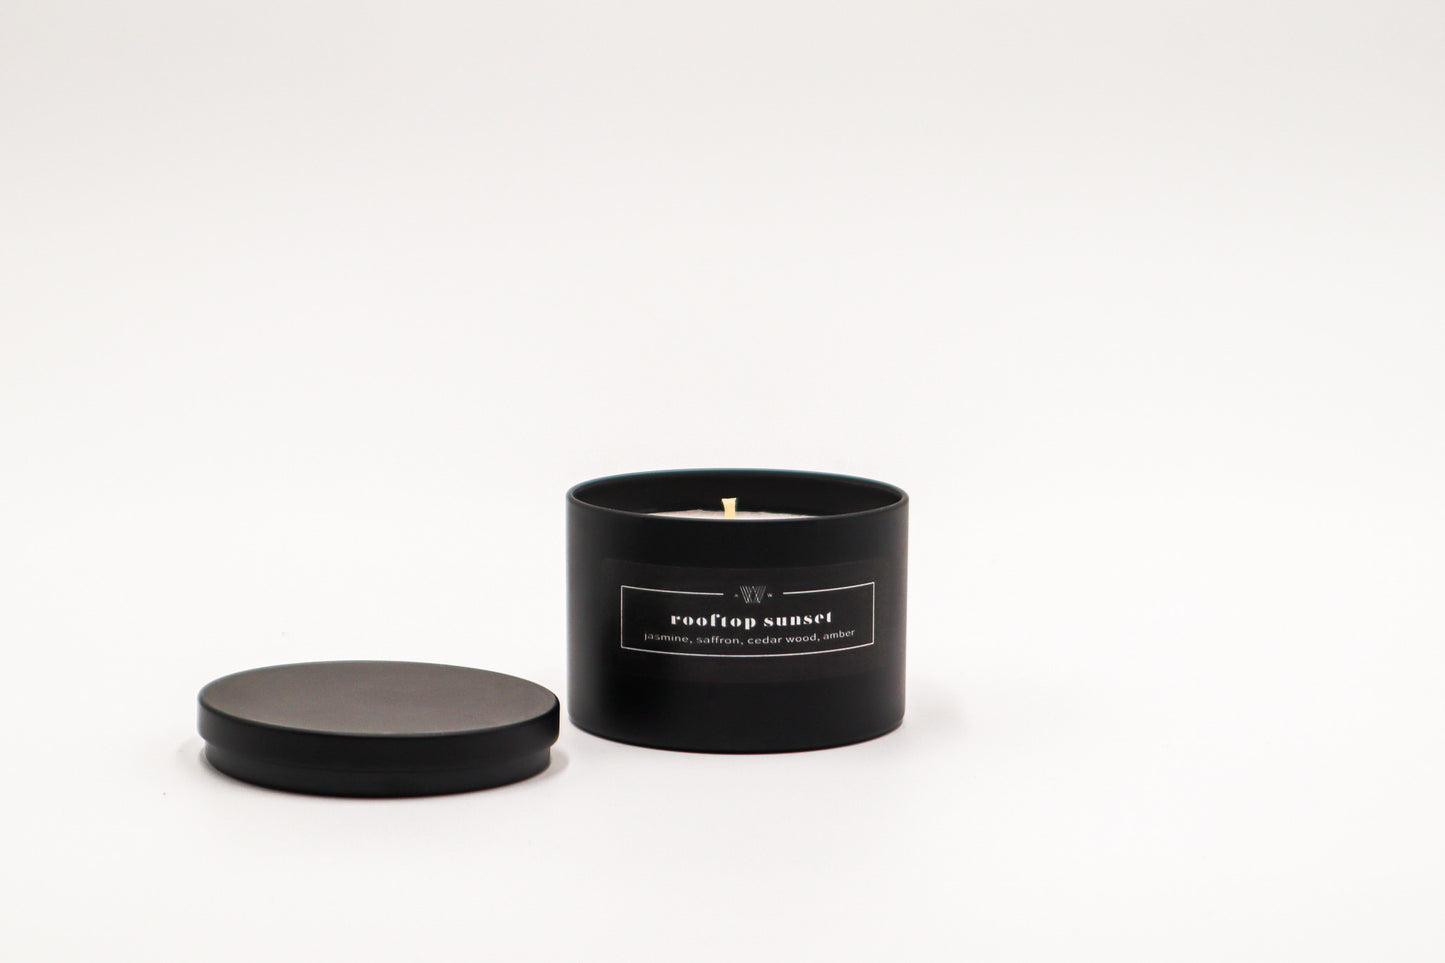 "Rooftop Sunset" Candle